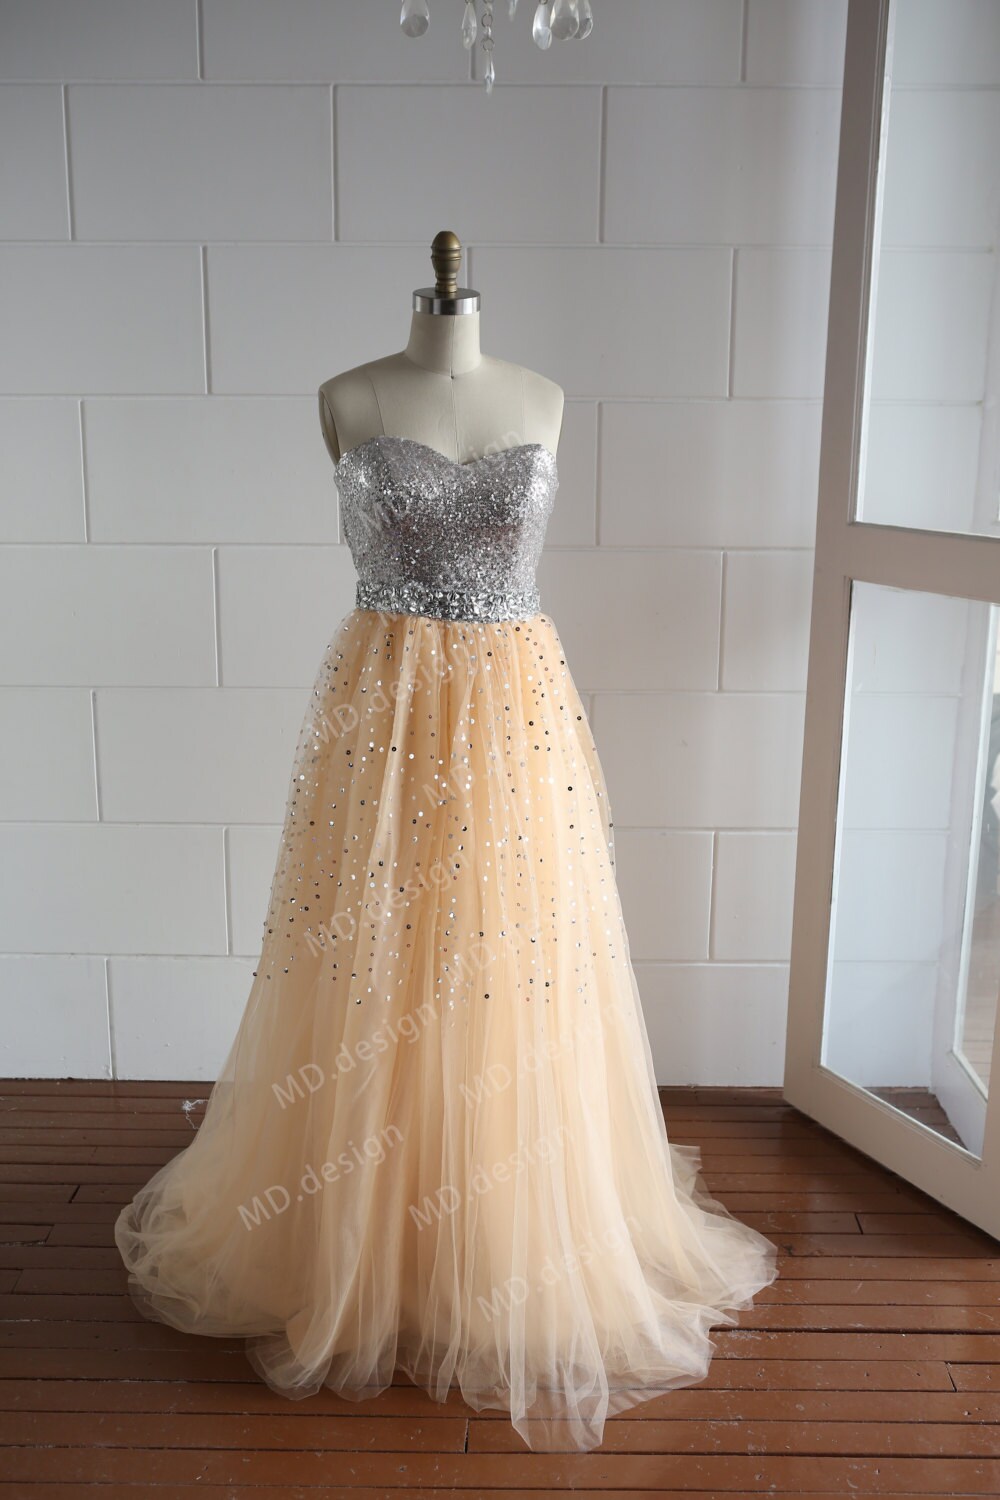 Silver Sequin Champagne Tulle Beaded Prom Dress Bridesmaid Dress Party Dress Strapless Sweetheart Dress